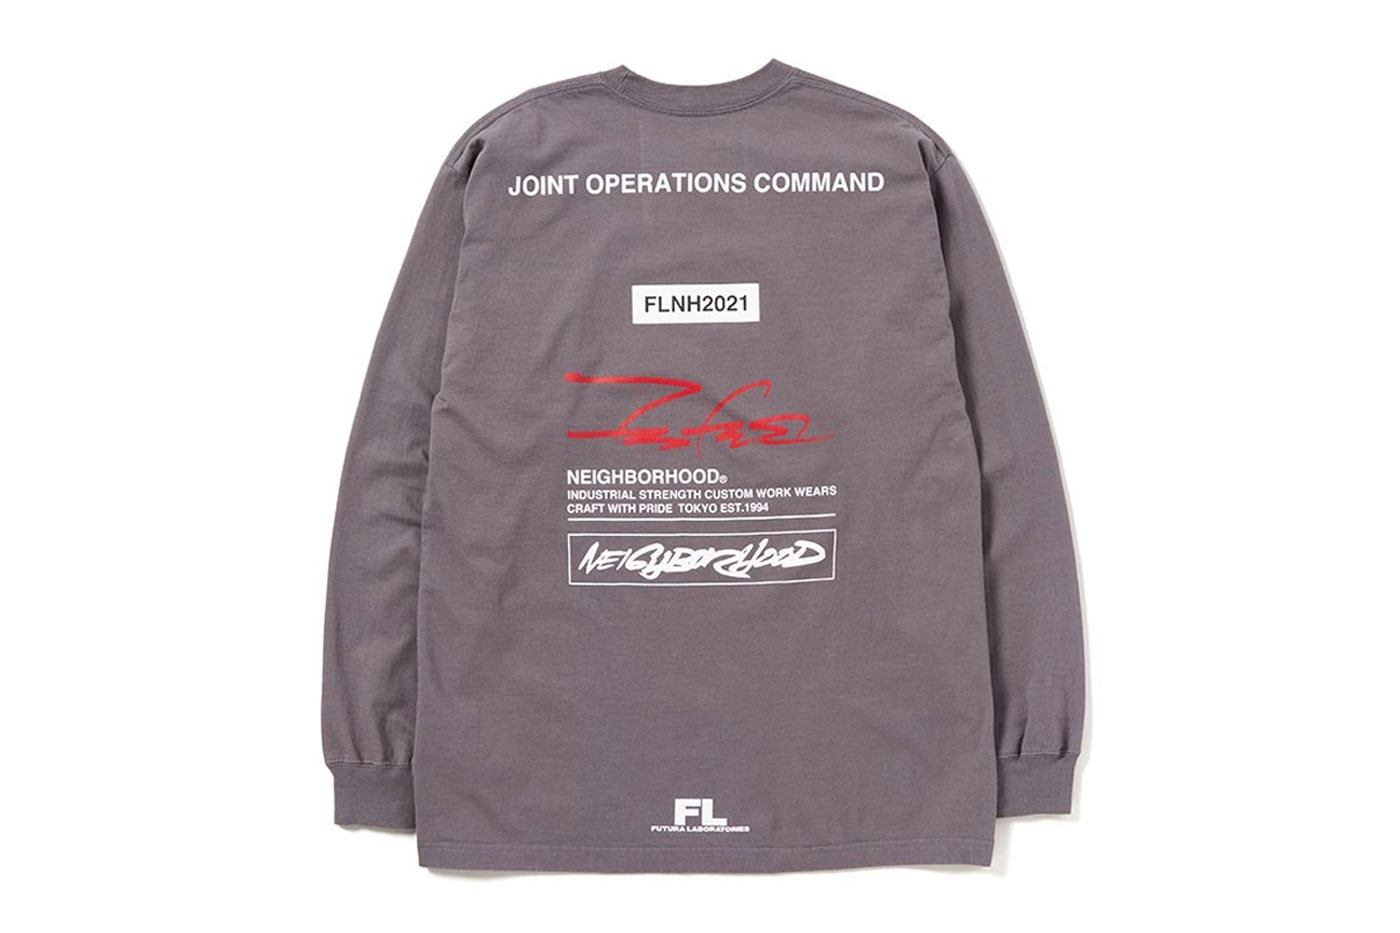 neighborhood futura laboratories collaboration collection pointman incense chamber gore tex infinium marmot pullover hoodie t shirt dad cap ma-1 chair camo e cot e hanger ep field office sk8thing ce release info